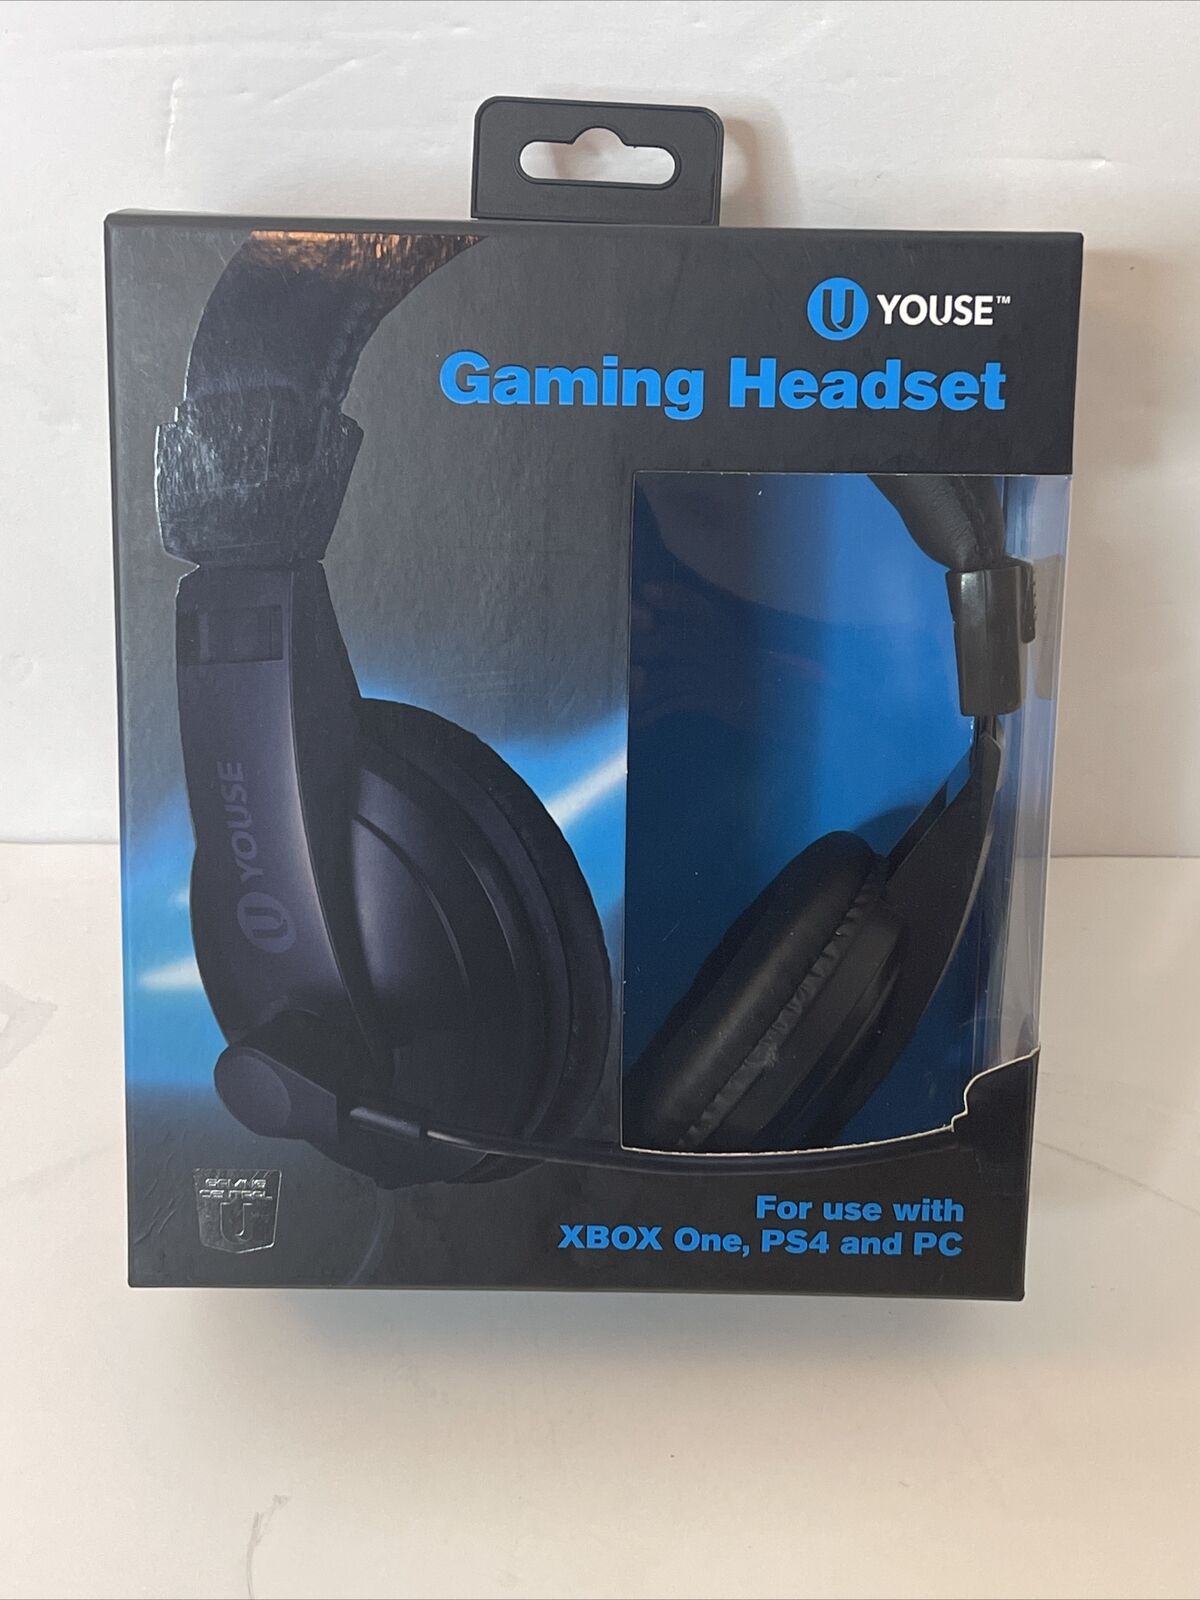 U-Youse Gaming Headset XBOX ONE, PS4, AND PC, With Built In Mic Brand New